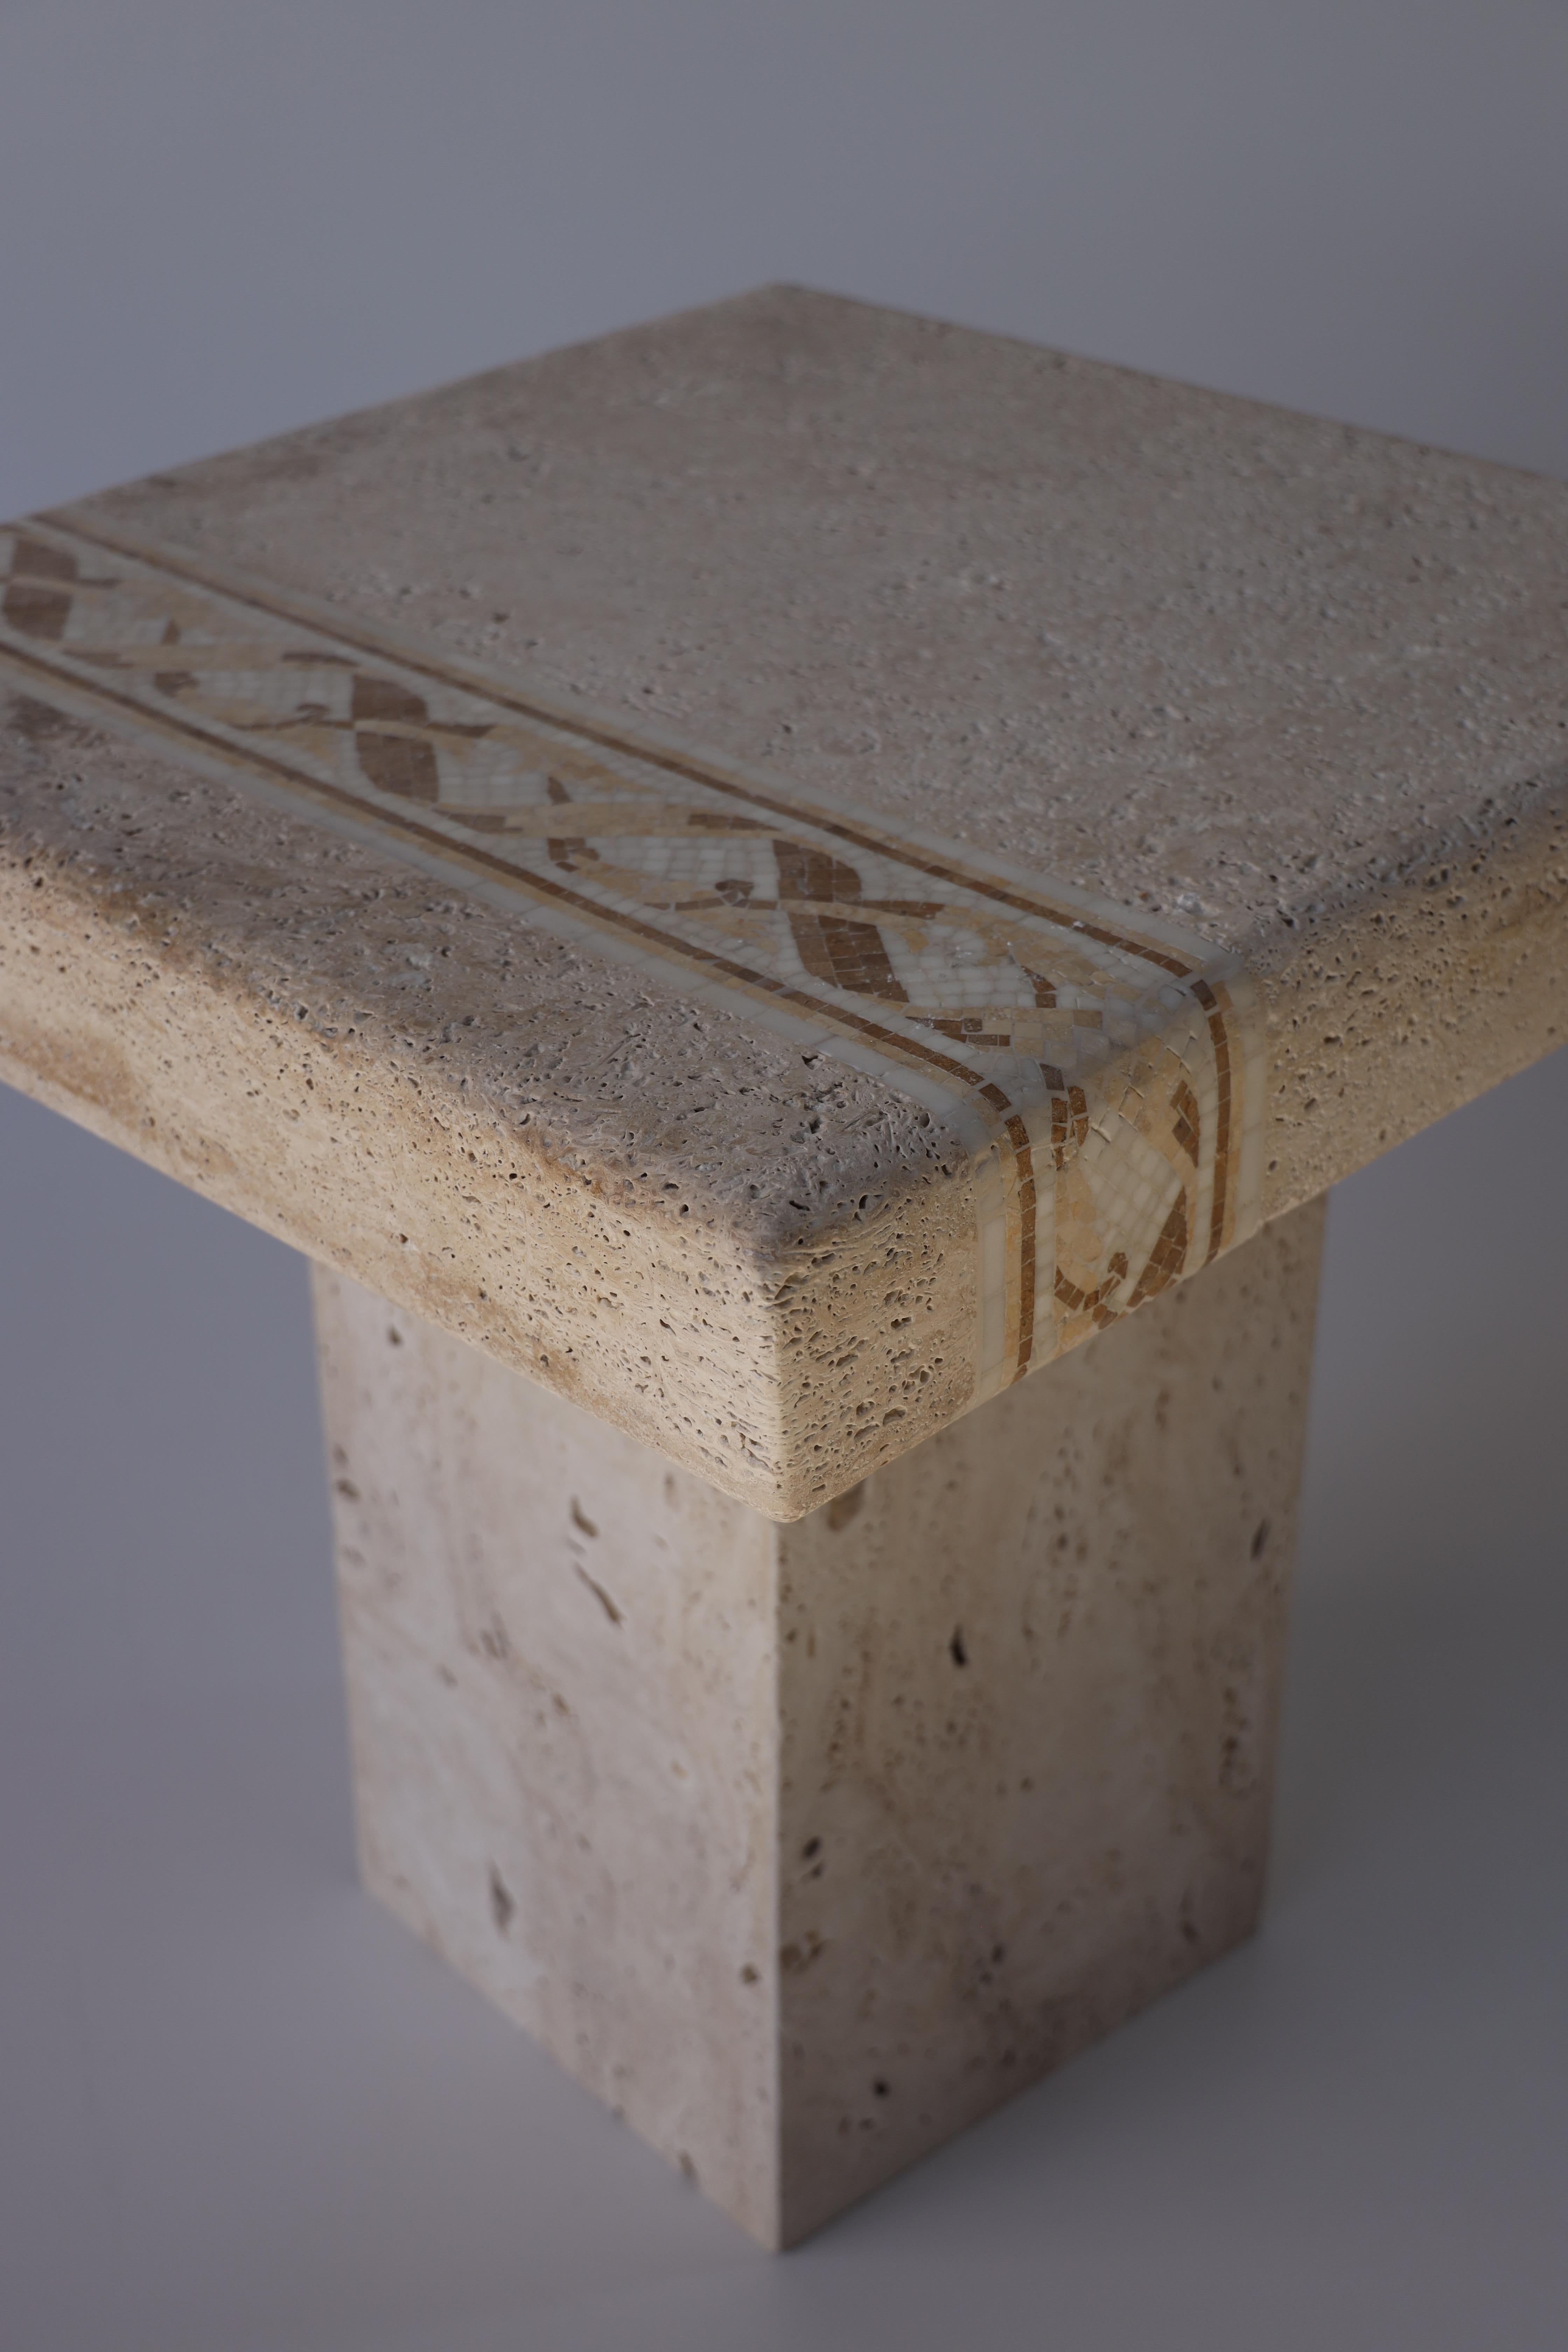 Introducing a work of art that transcends time and trends - our Travertine and Marble Mosaic Coffee Table. This exquisite piece of furniture seamlessly combines the rustic charm of travertine with the opulent allure of marble mosaic, bringing